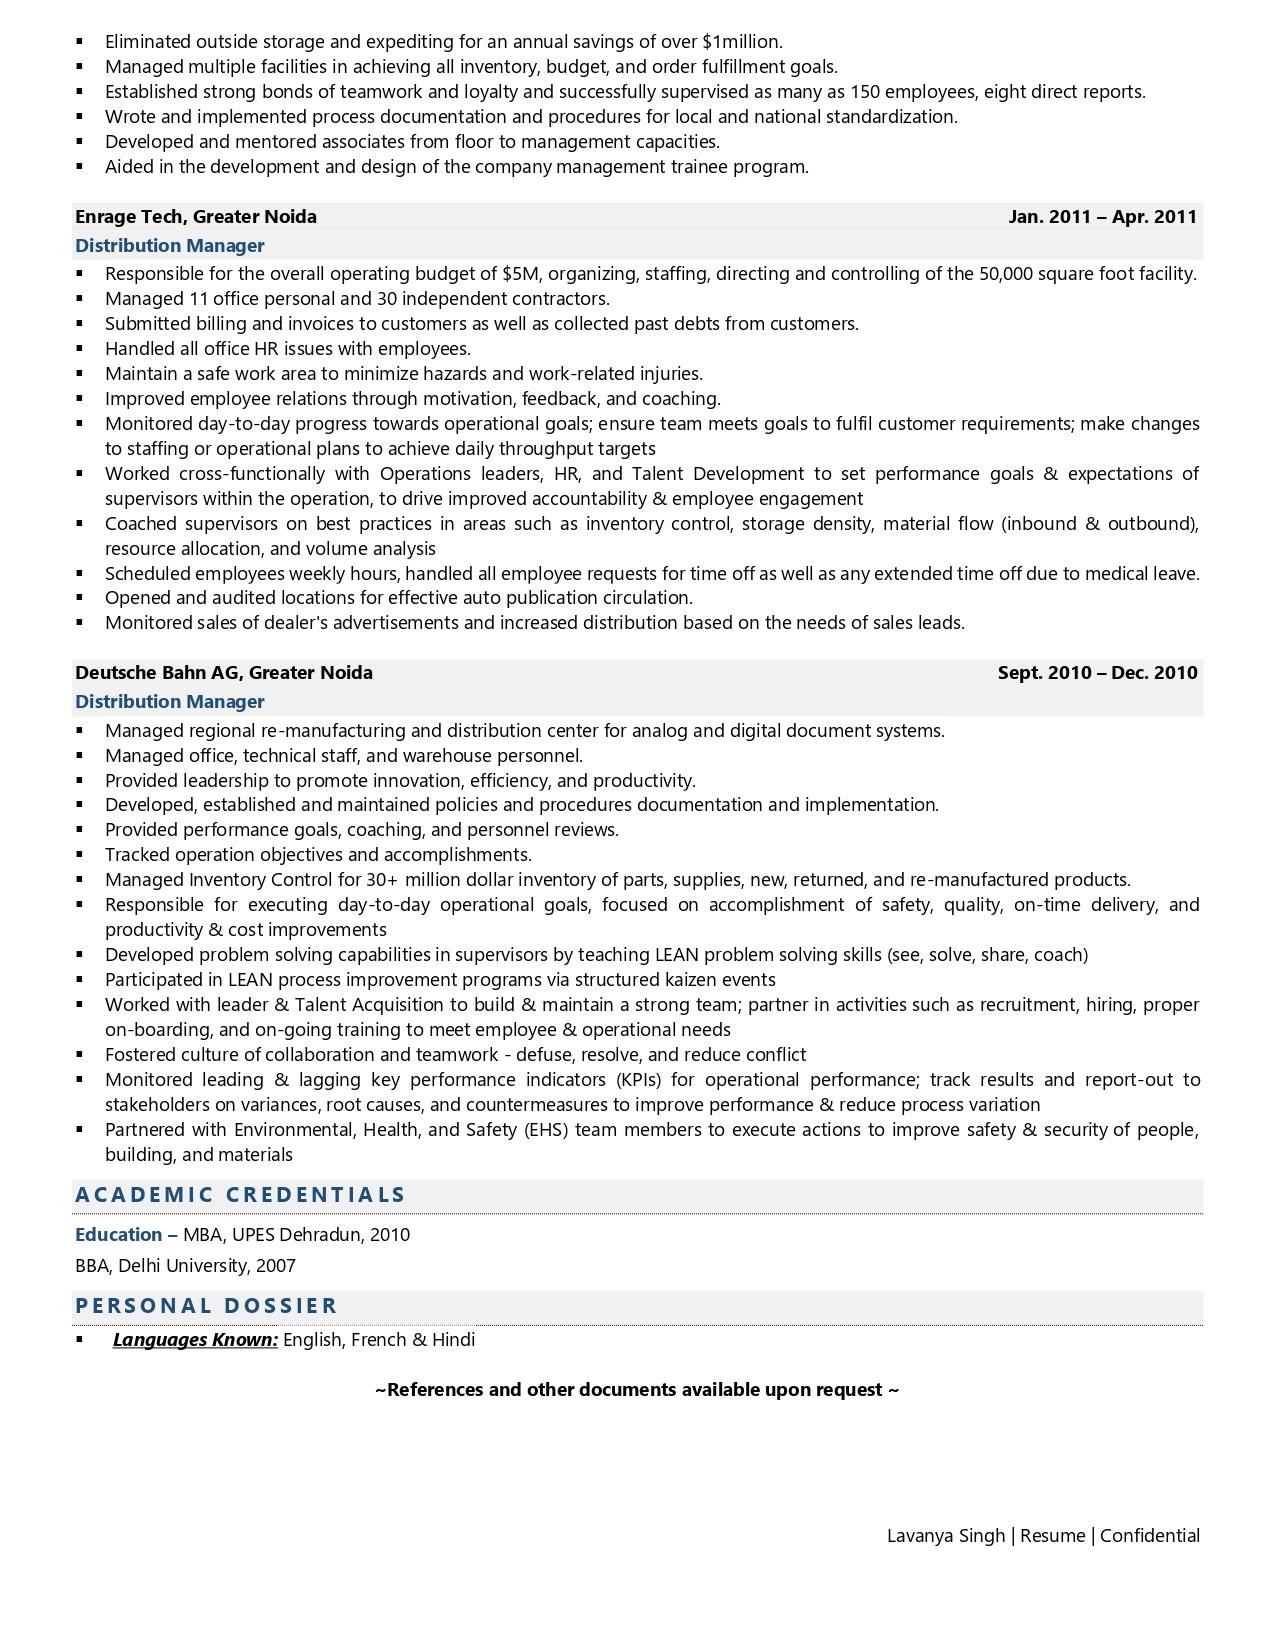 Distribution Manager - Resume Example & Template